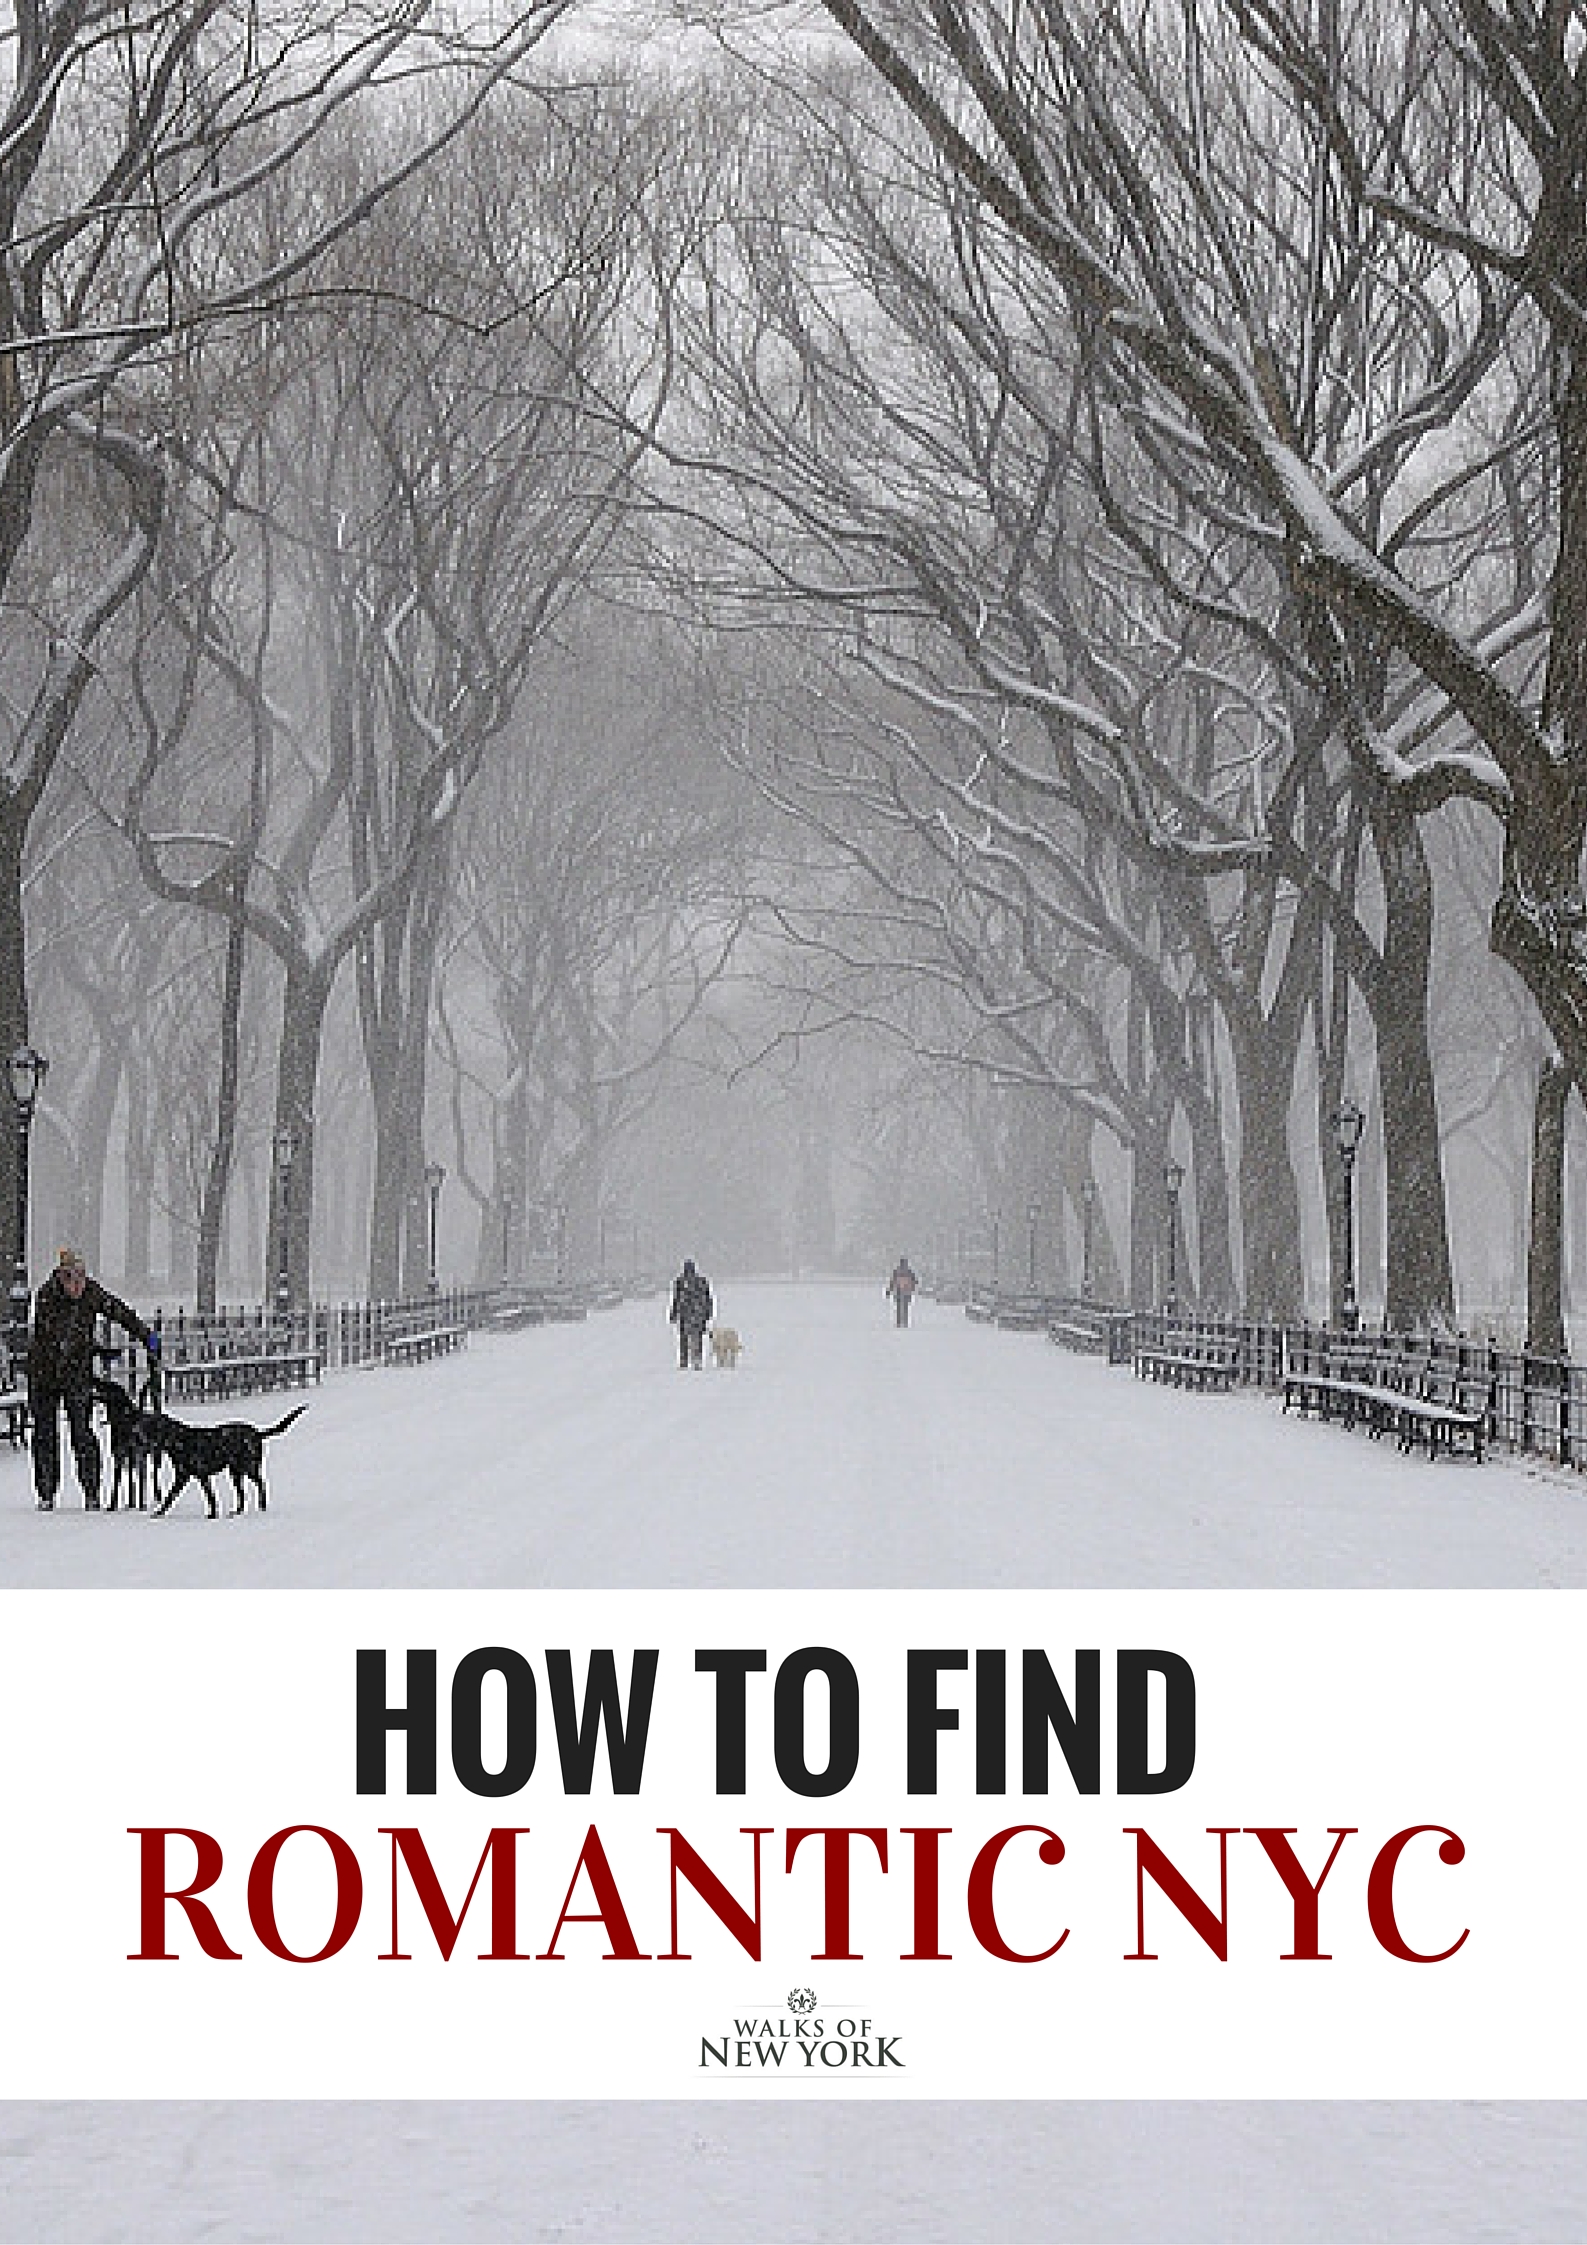 Walking through central park on a snowy day is one of the most romantic things to do in New York. Find out other great romantic options in our blog. Photo courtesy of Ralph Hockens Via Flickr.